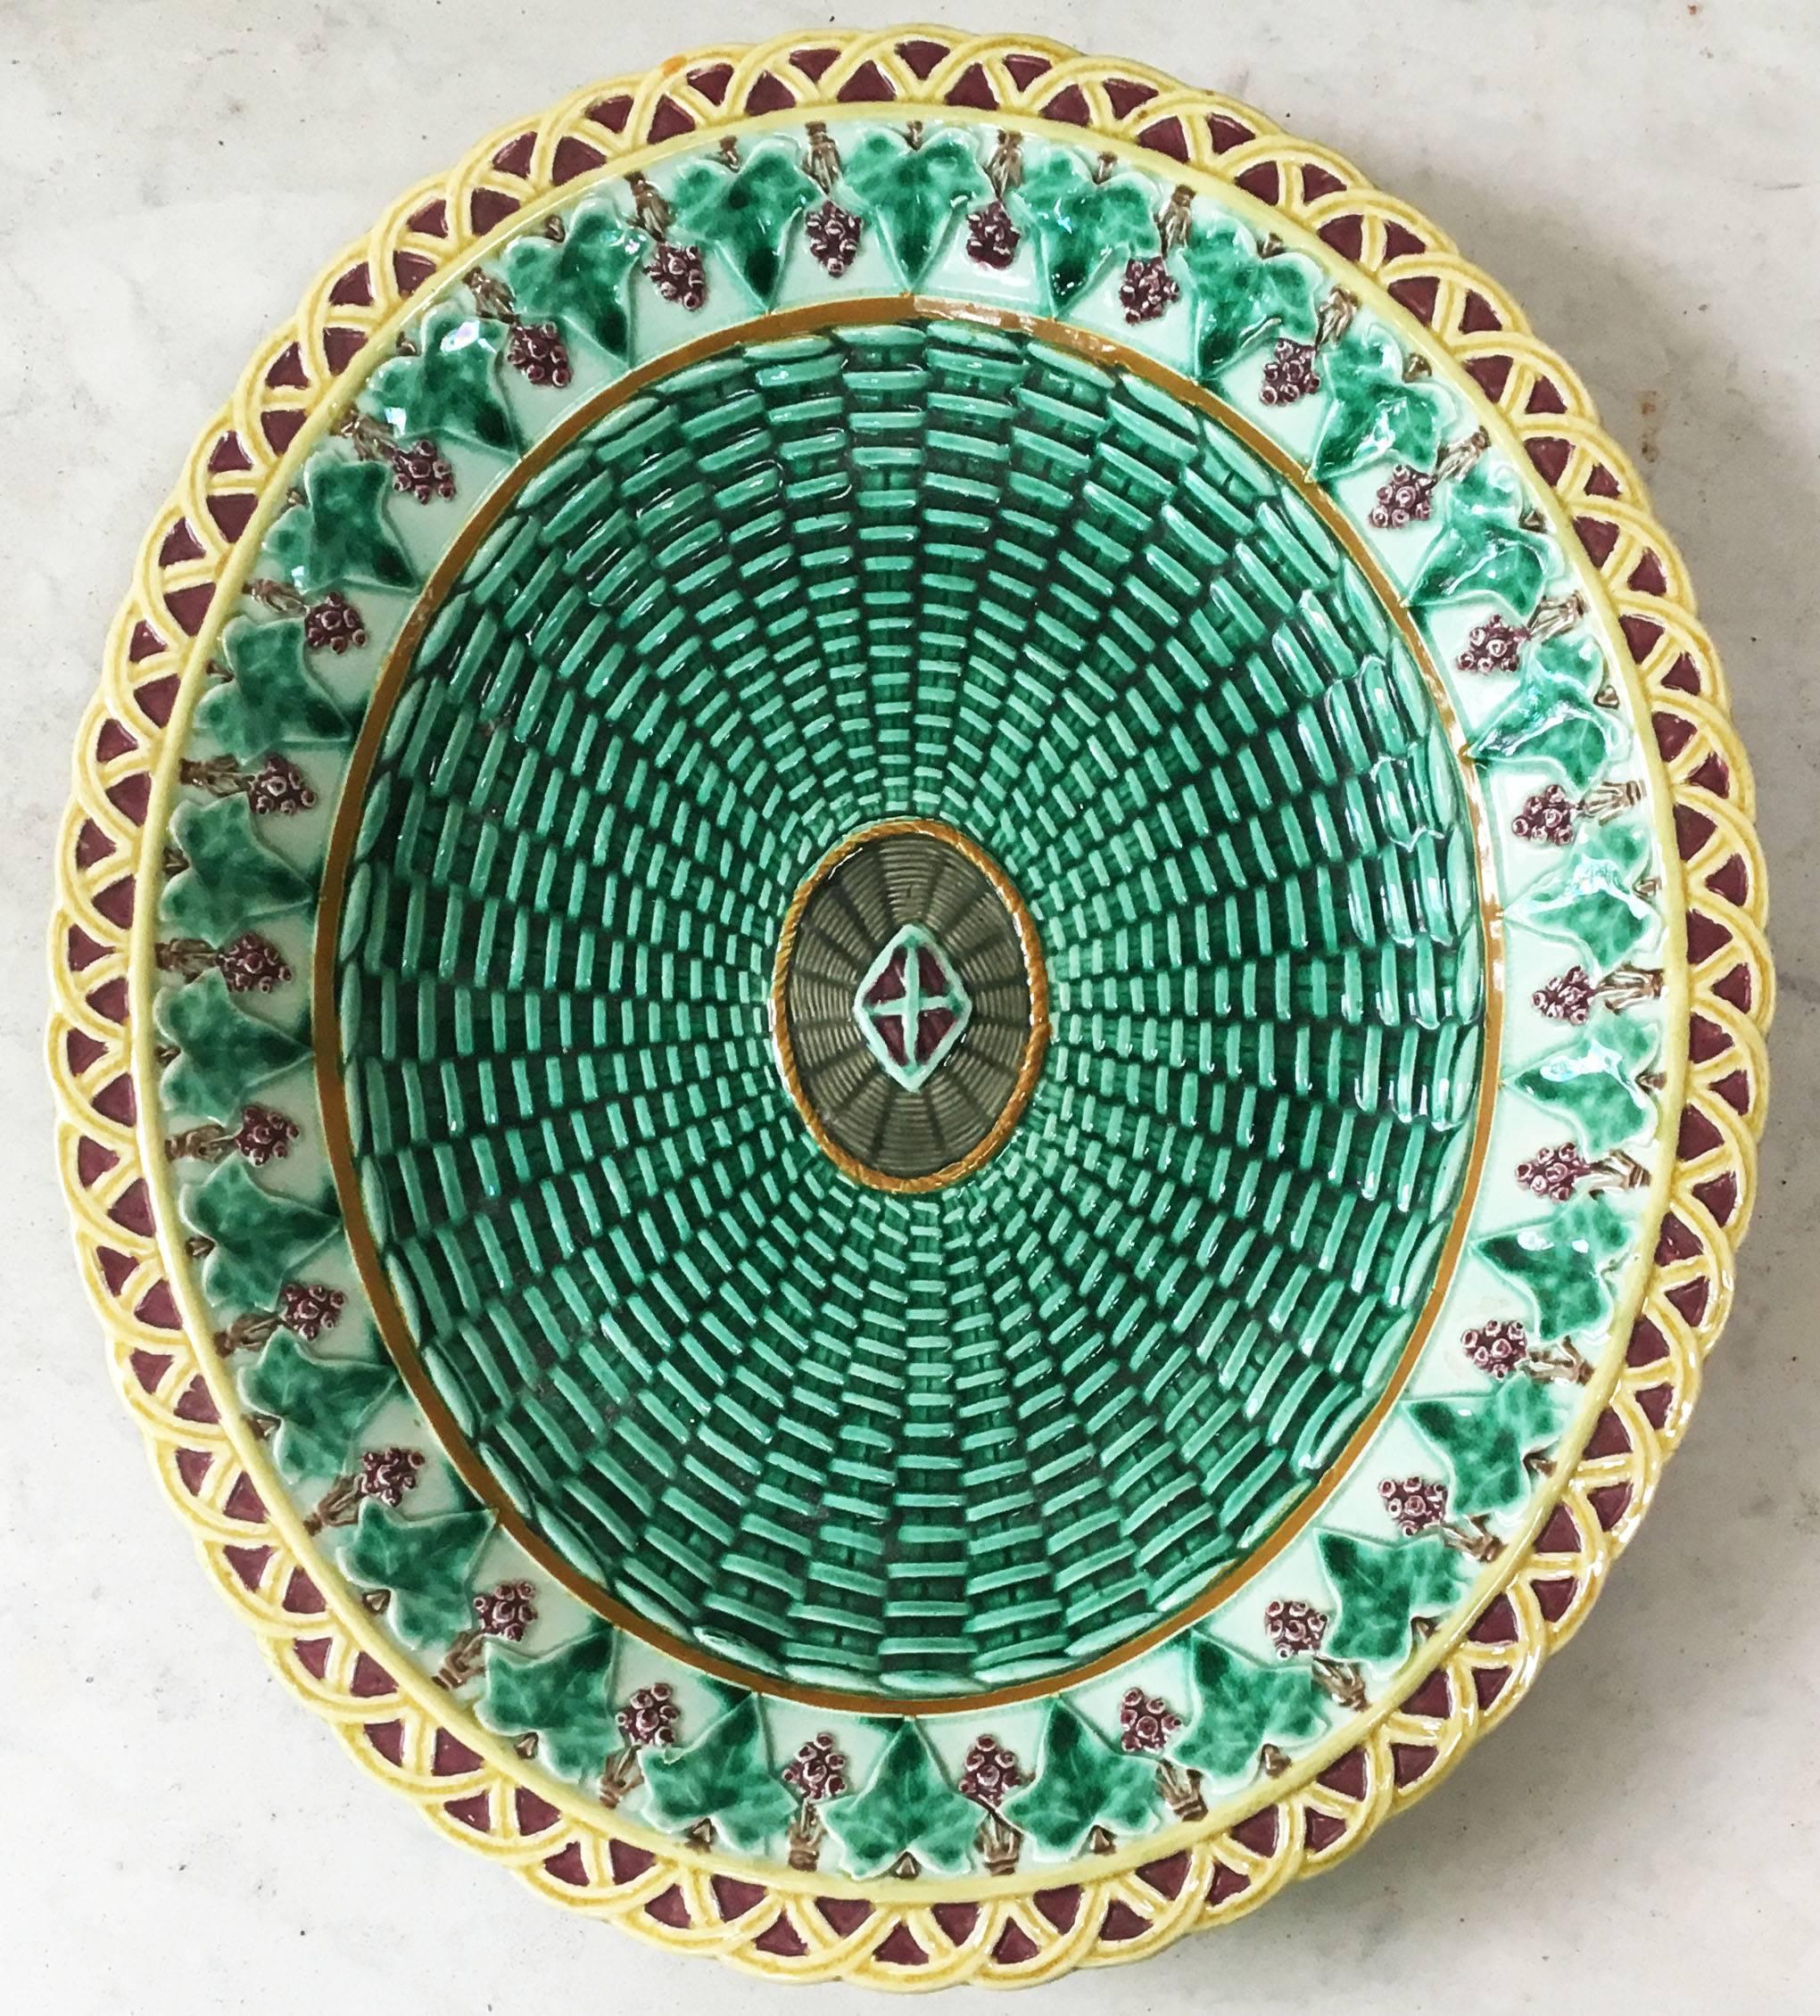 Lovely Victorian Majolica platter wicker imitation, decorated with grapes and ivy leaves signed Wedgwood end of 19th century.